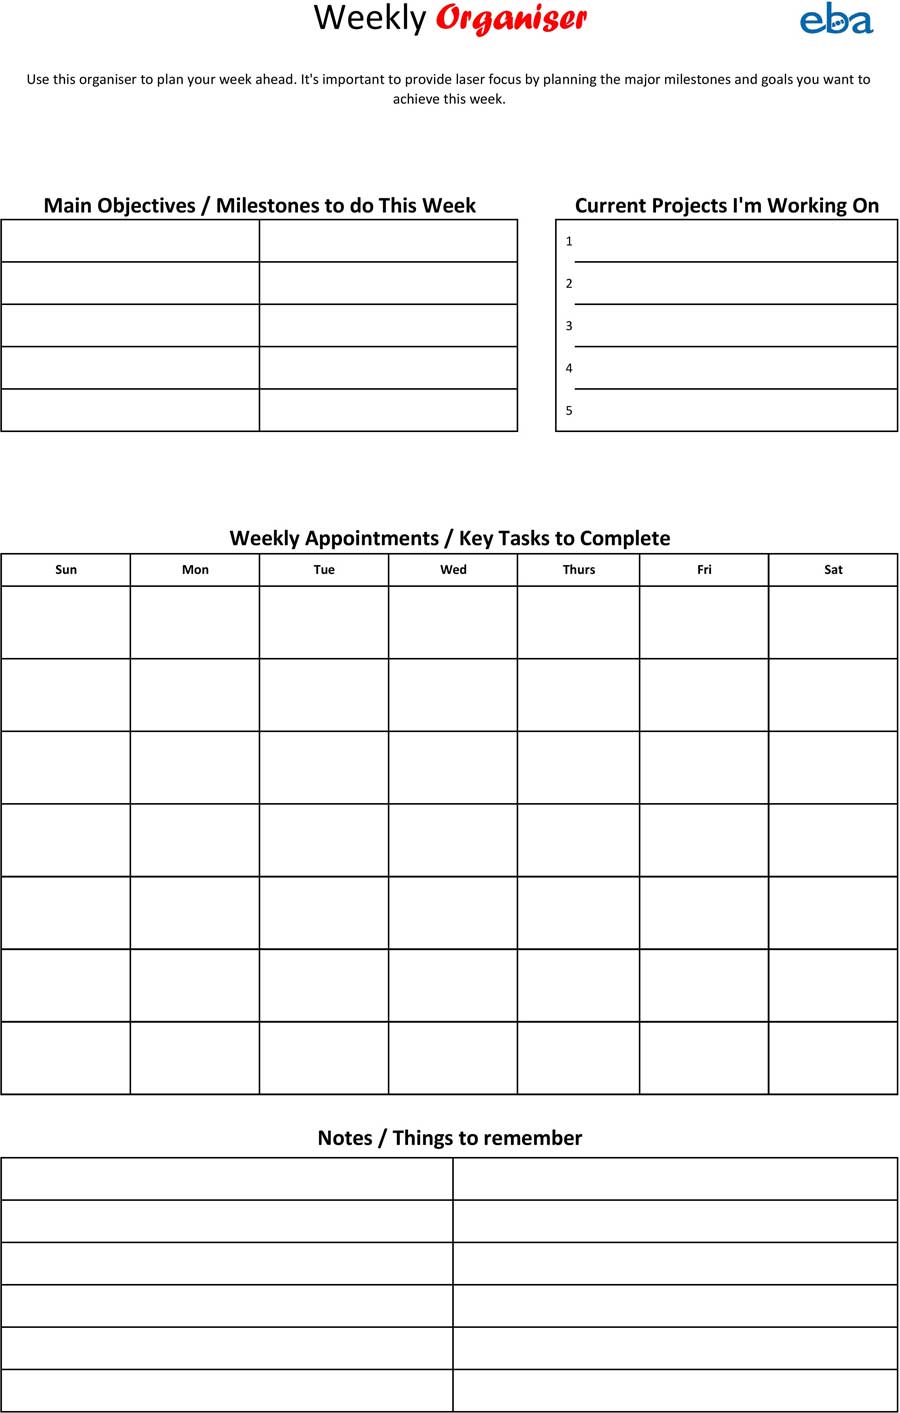 improve time management skills: Weekly planner